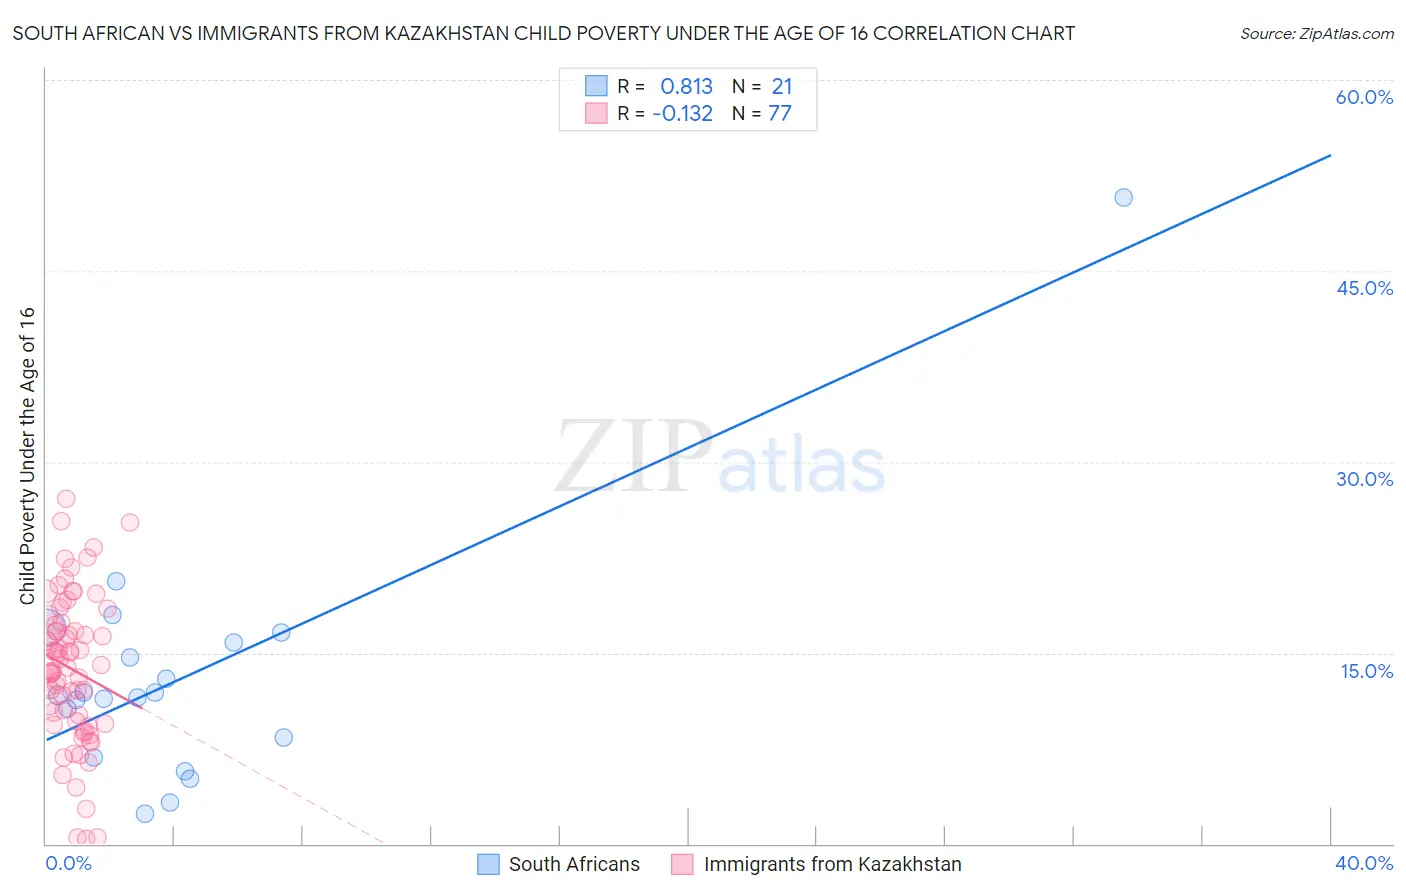 South African vs Immigrants from Kazakhstan Child Poverty Under the Age of 16